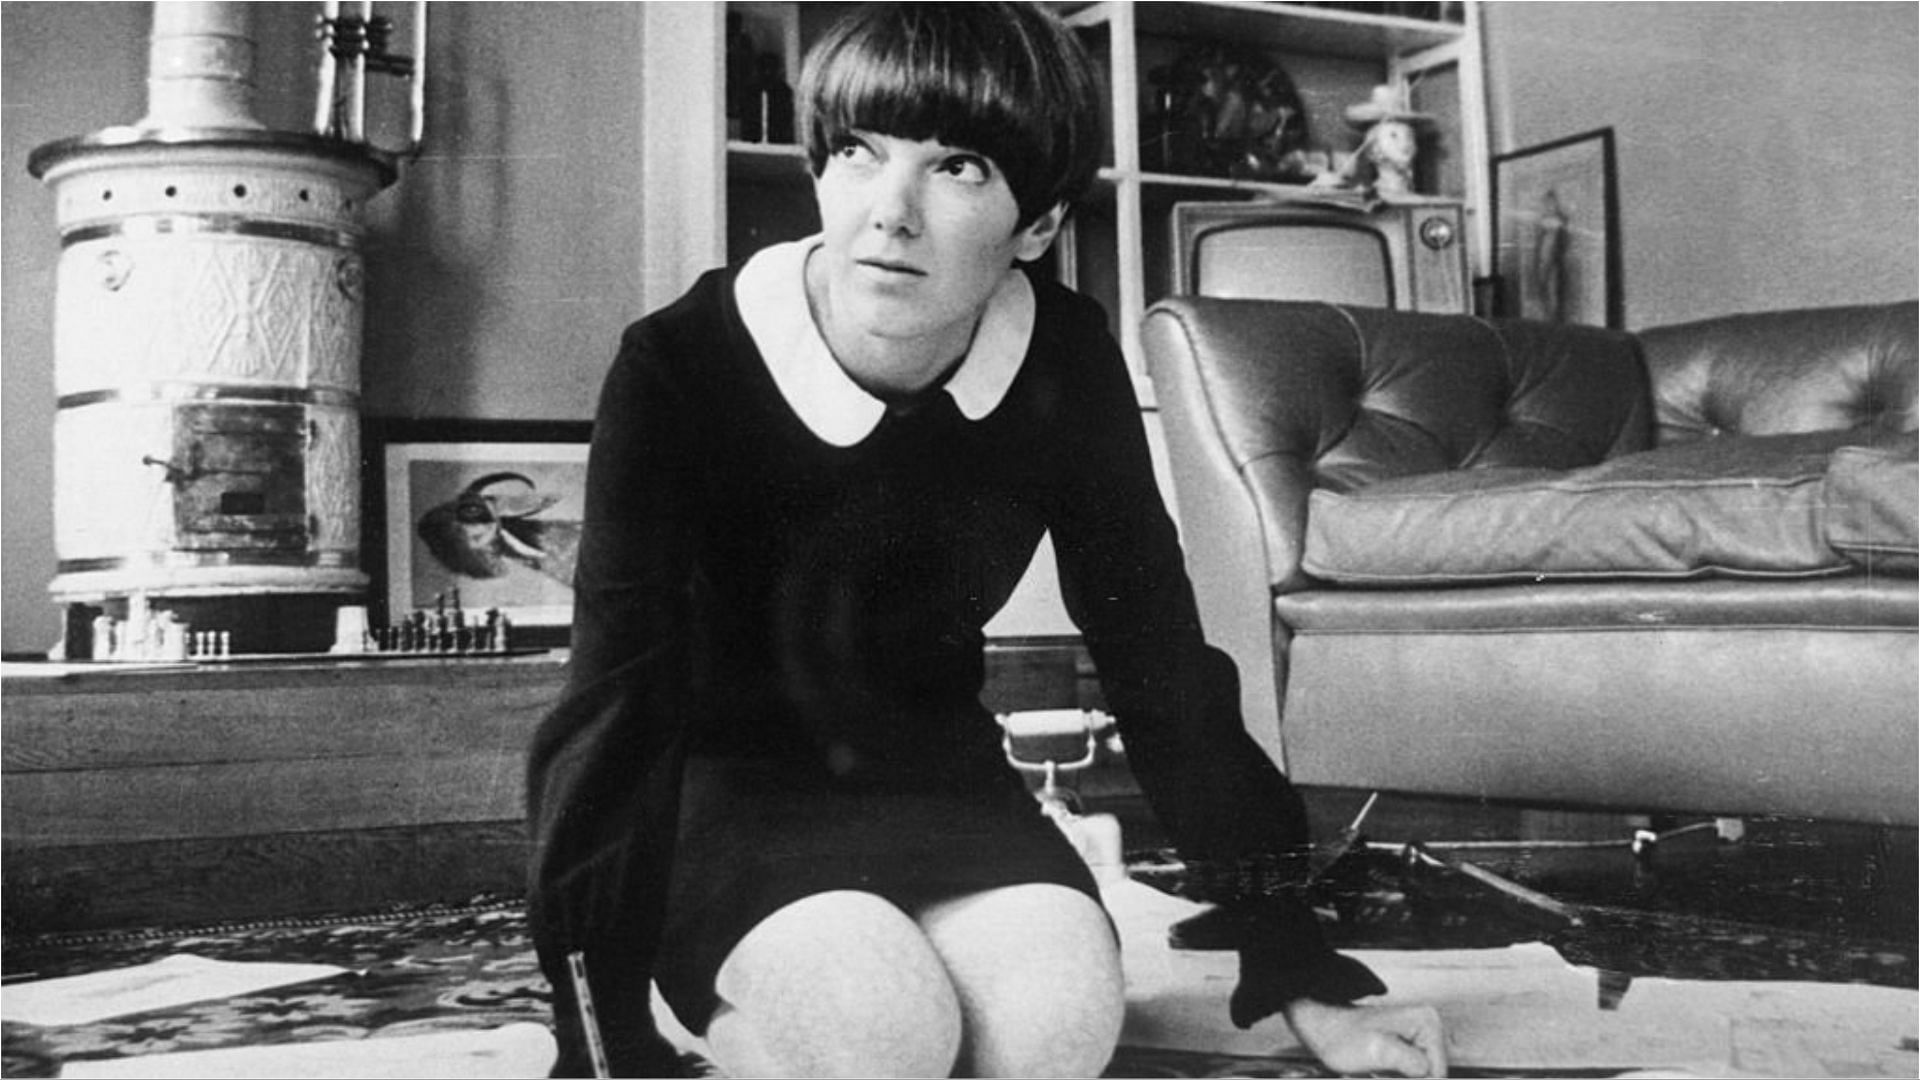 Mary Quant recenty died at the age of 93 (Image via Keystone/Getty Images)